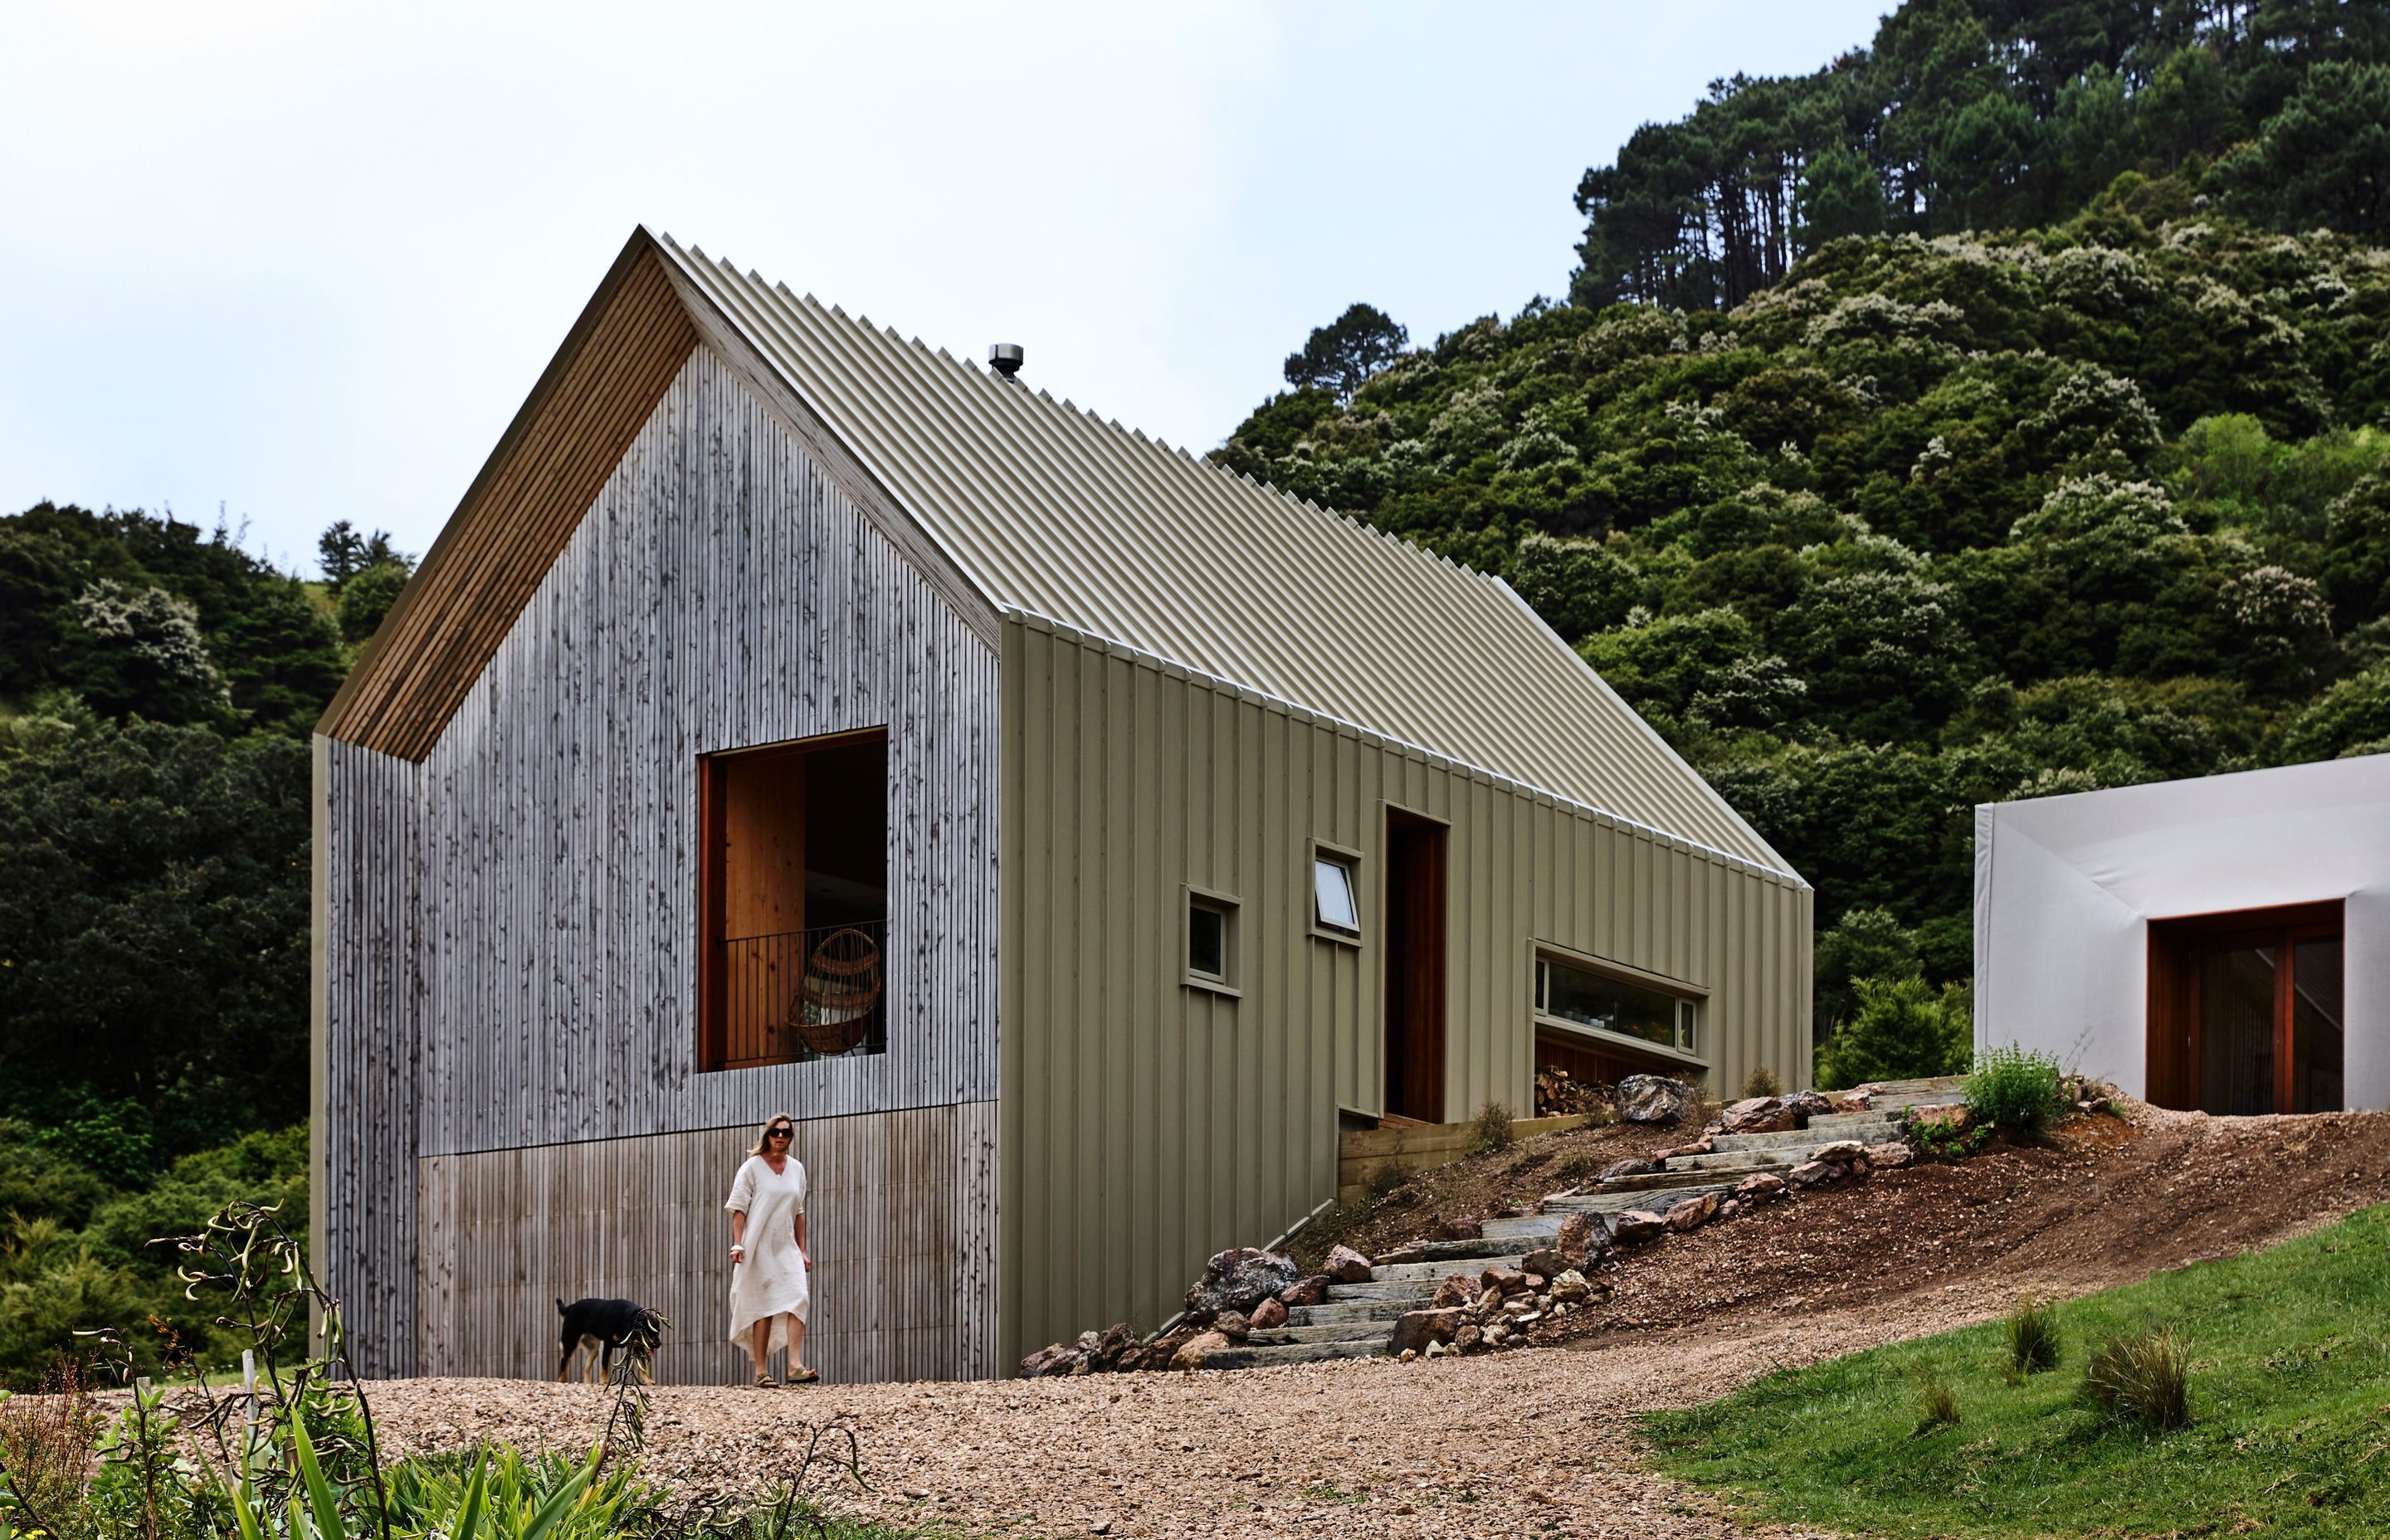 With hints of brown, olive and khaki undertones, COLORSTEEL Lichen helps this home on Waiheke Island to blend with the surrounding landscape.